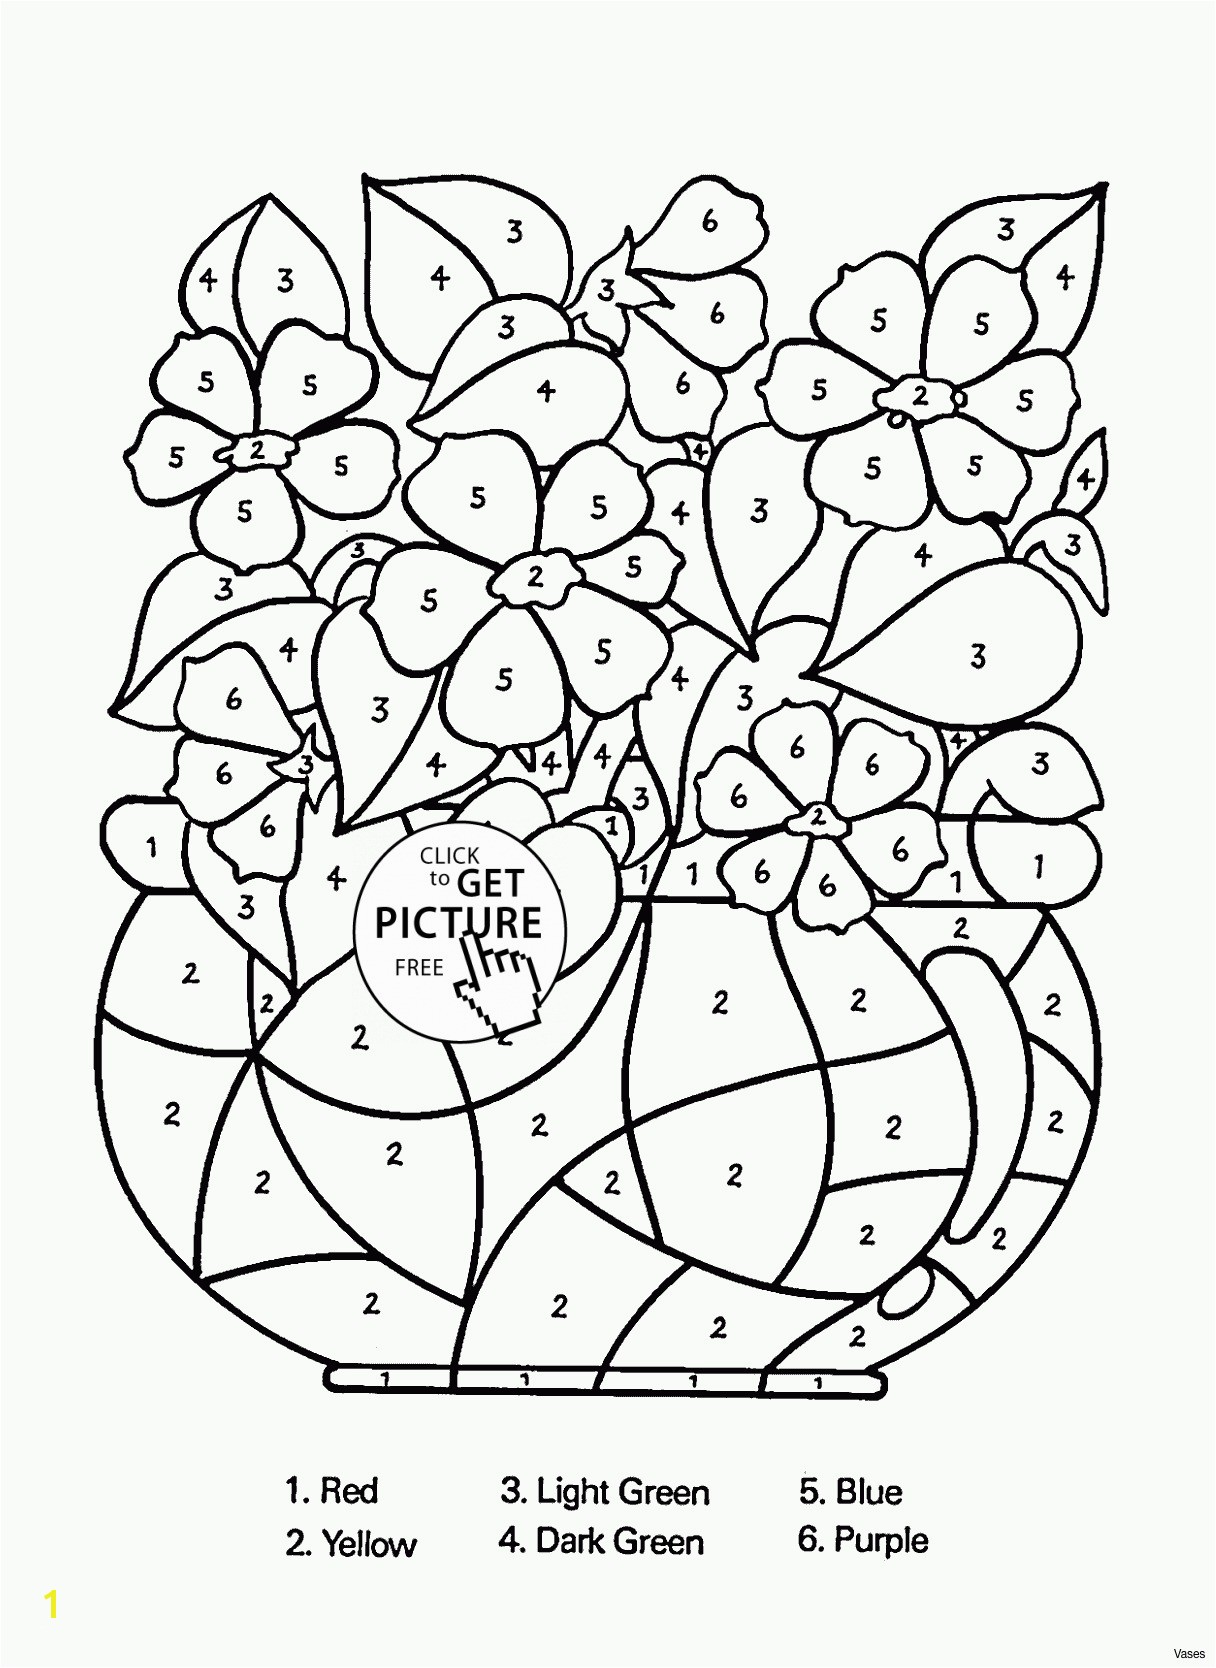 Free Printable Quote Coloring Pages for Adults Best Pokemon Coloring Pages Coloring Pages